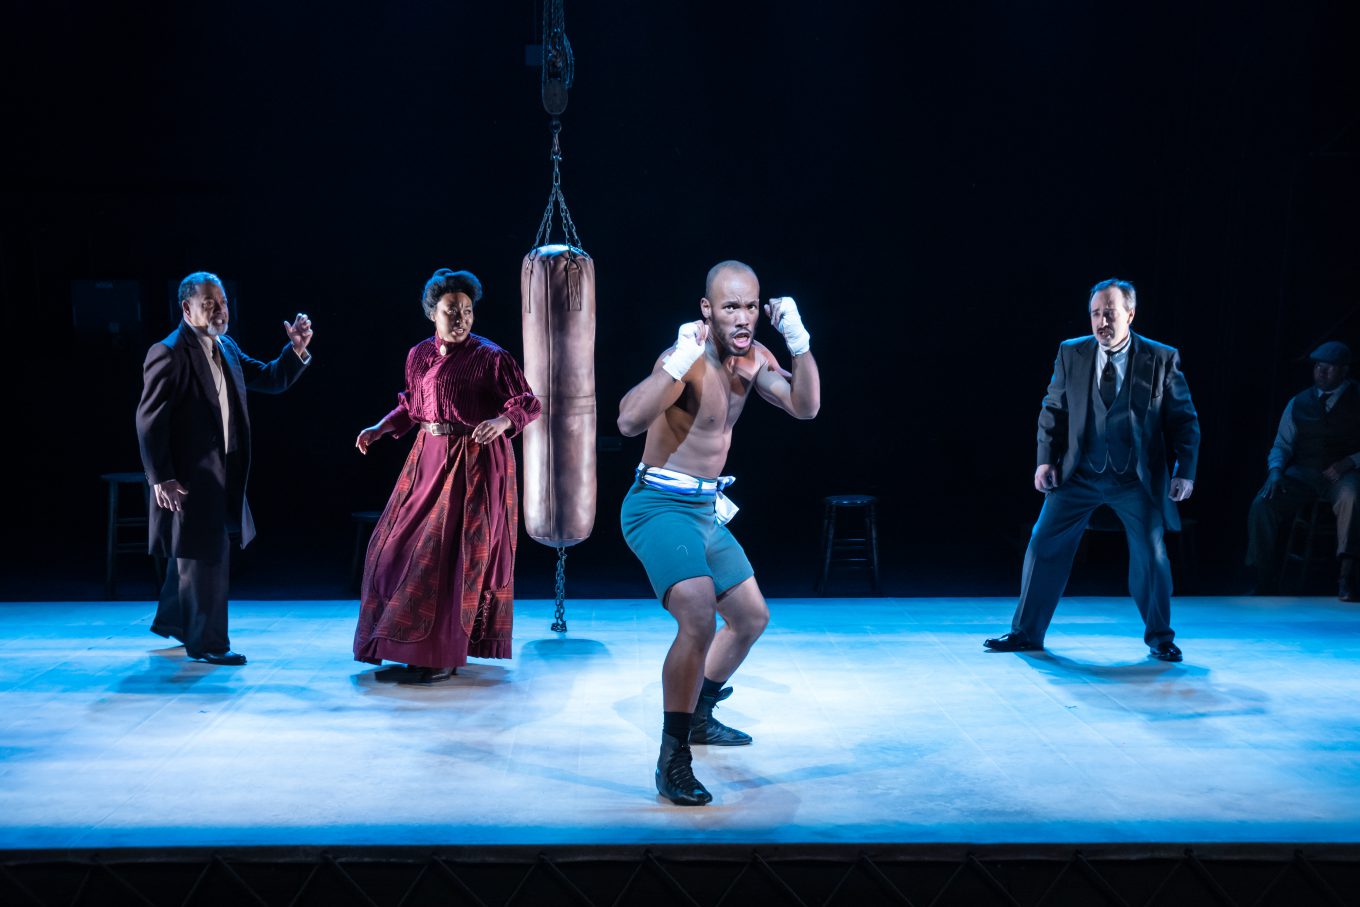 Dressed in 1910s costumes, a Black boxer stands in fight stance center stage, surrounded by other characters in The Royale